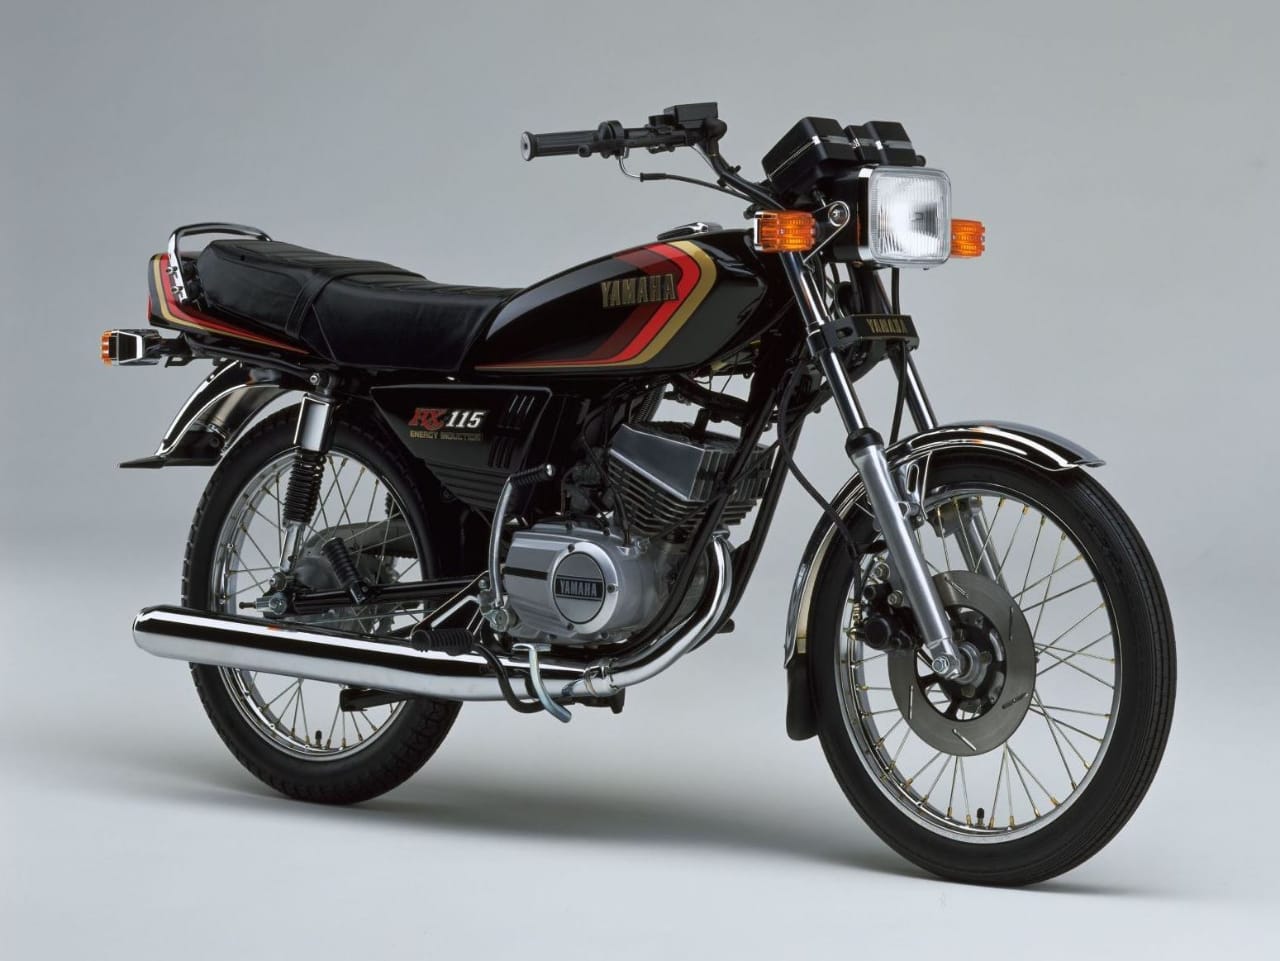 Yamaha RX 115 Specfications And Features